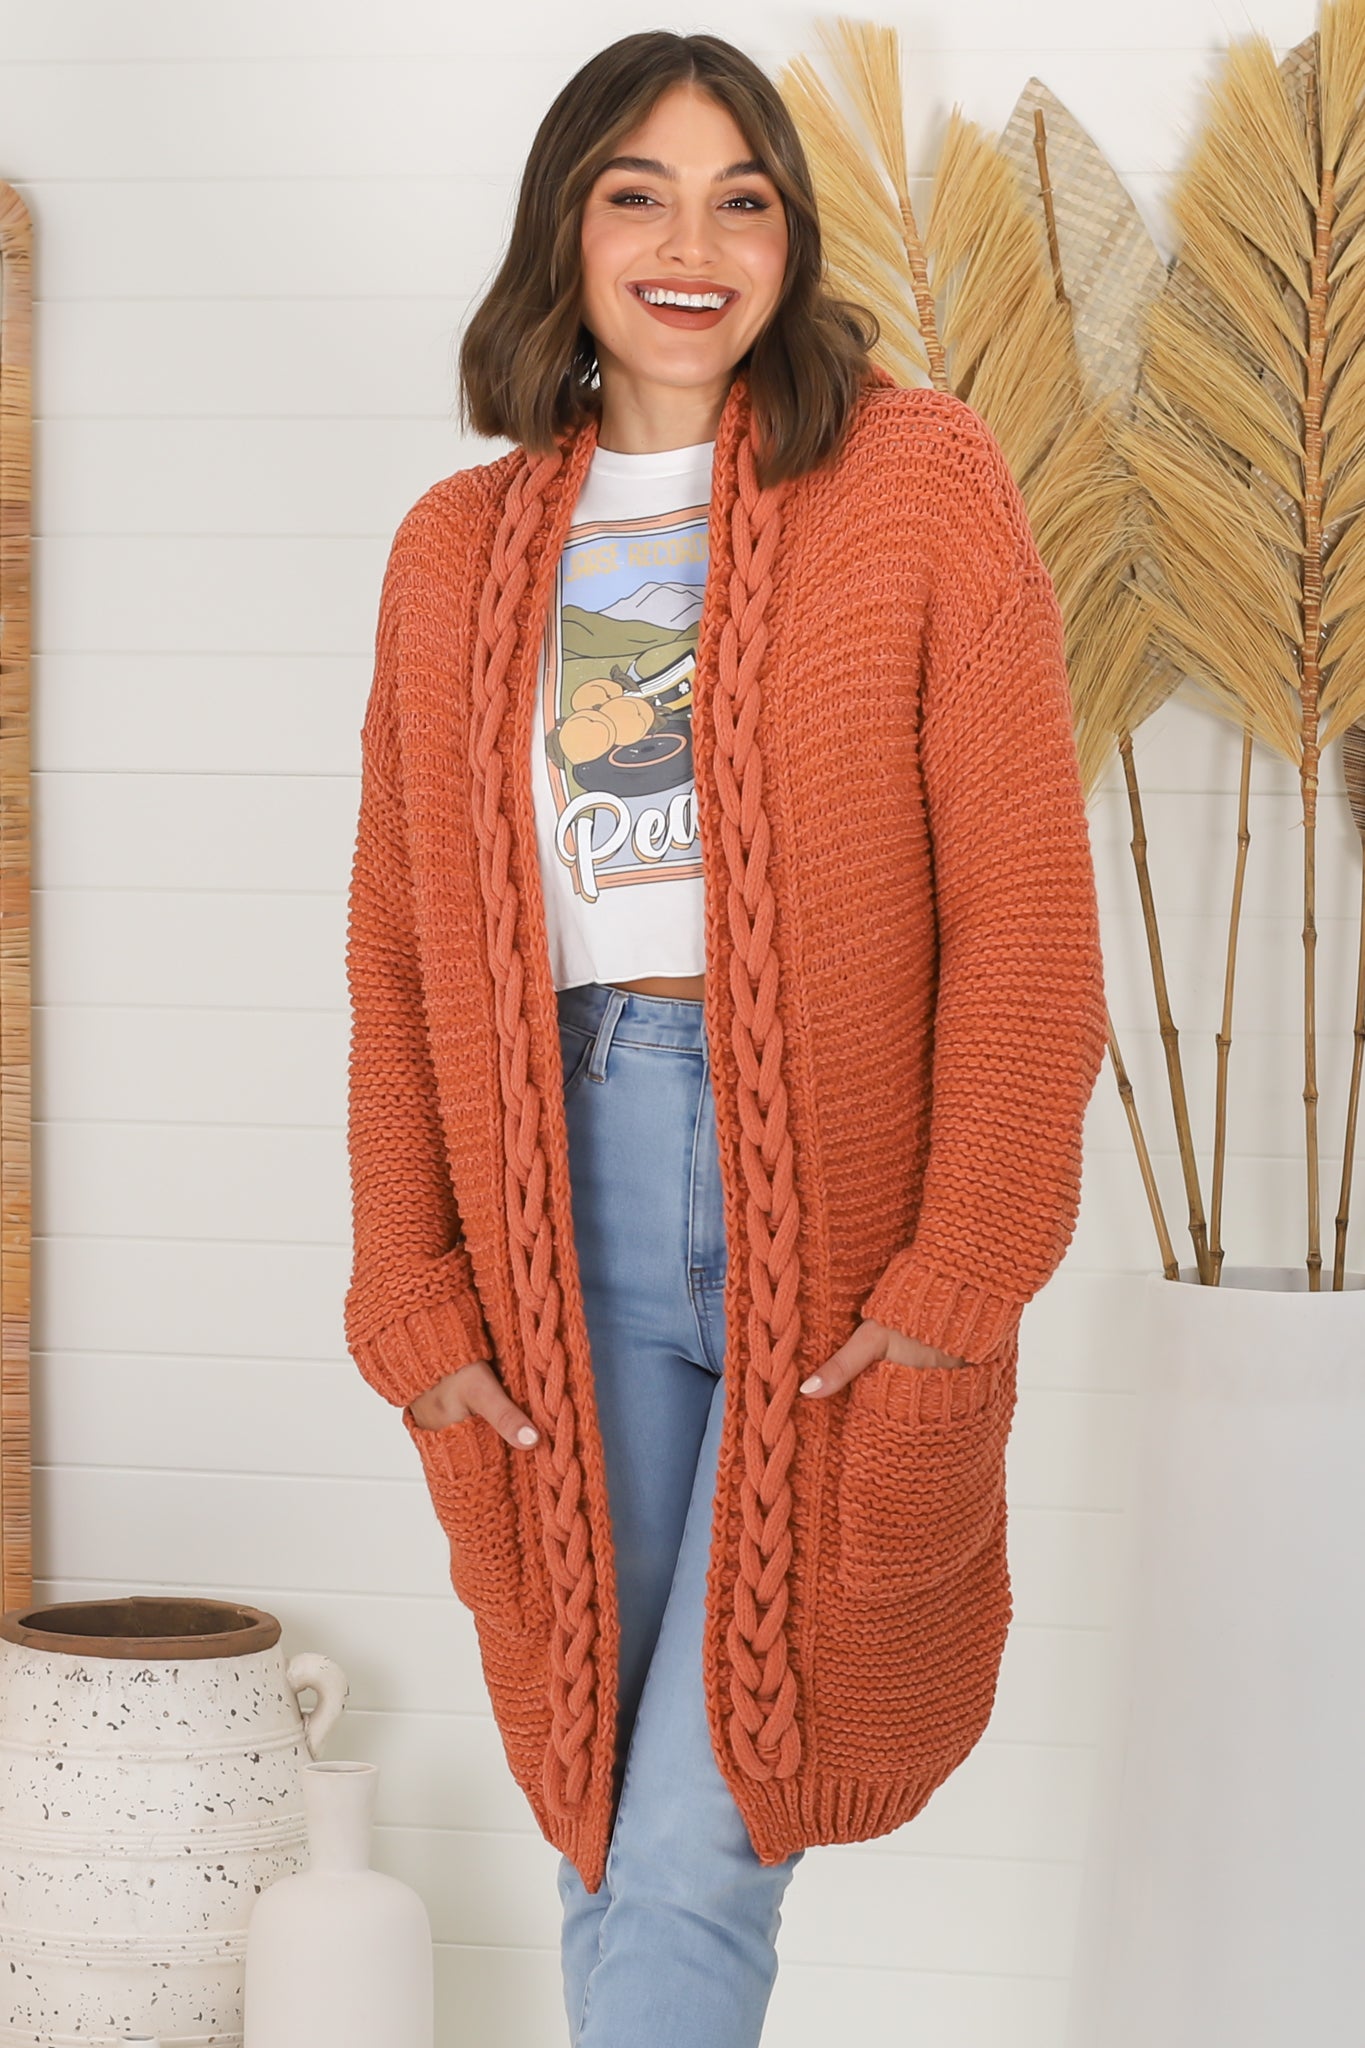 Toolara Cardigan - Thick Cable Knit Hooded Cardigan with Pocket in Rust